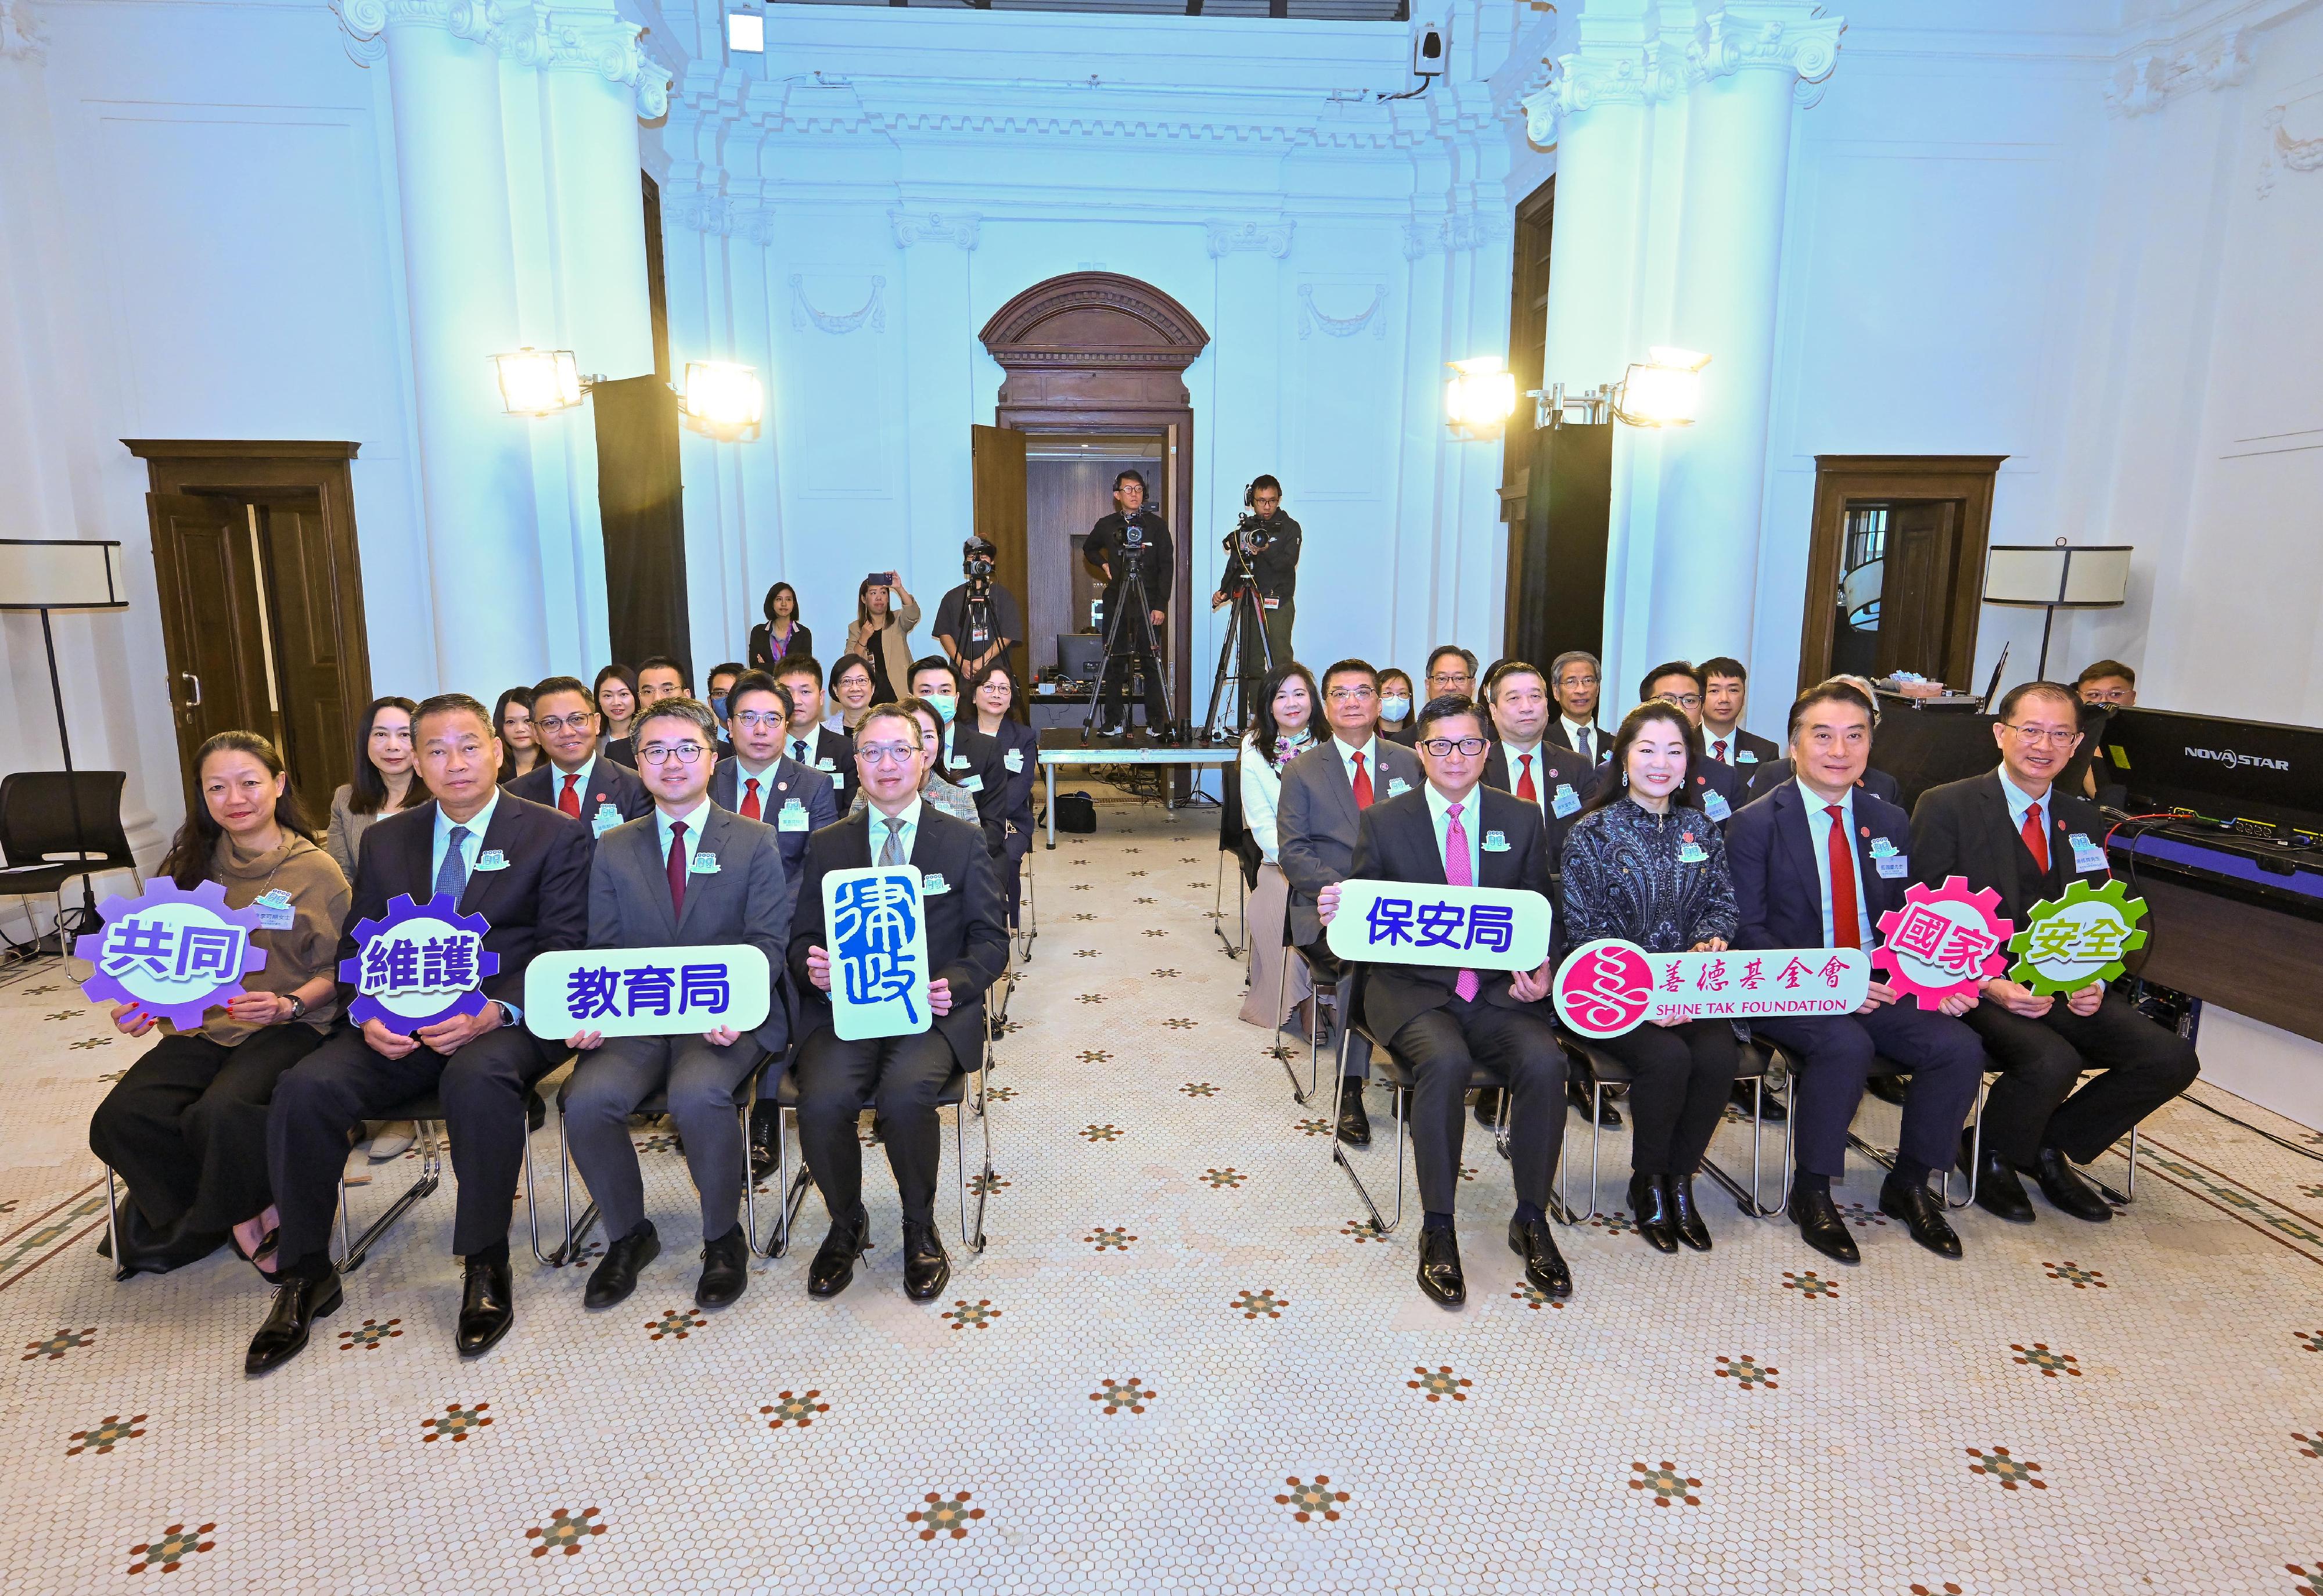 The Department of Justice, the Security Bureau, the Education Bureau and the Hong Kong Shine Tak Foundation jointly organised the Territory-wide Inter-school National Security Knowledge Challenge, and held a launching ceremony at the former French Mission Building today (December 3). Photo shows (front row, from second left) the Director of the liaison office of the Office for Safeguarding National Security of the Central People's Government in the Hong Kong Special Administrative Region, Mr Deng Jianwei; the Under Secretary for Education, Mr Sze Chun-fai; the Secretary for Justice, Mr Paul Lam, SC; the Secretary for Security, Mr Tang Ping-keung; and the Chairman of the Hong Kong Shine Tak Foundation, Mrs Tung Ng Ling-ling.